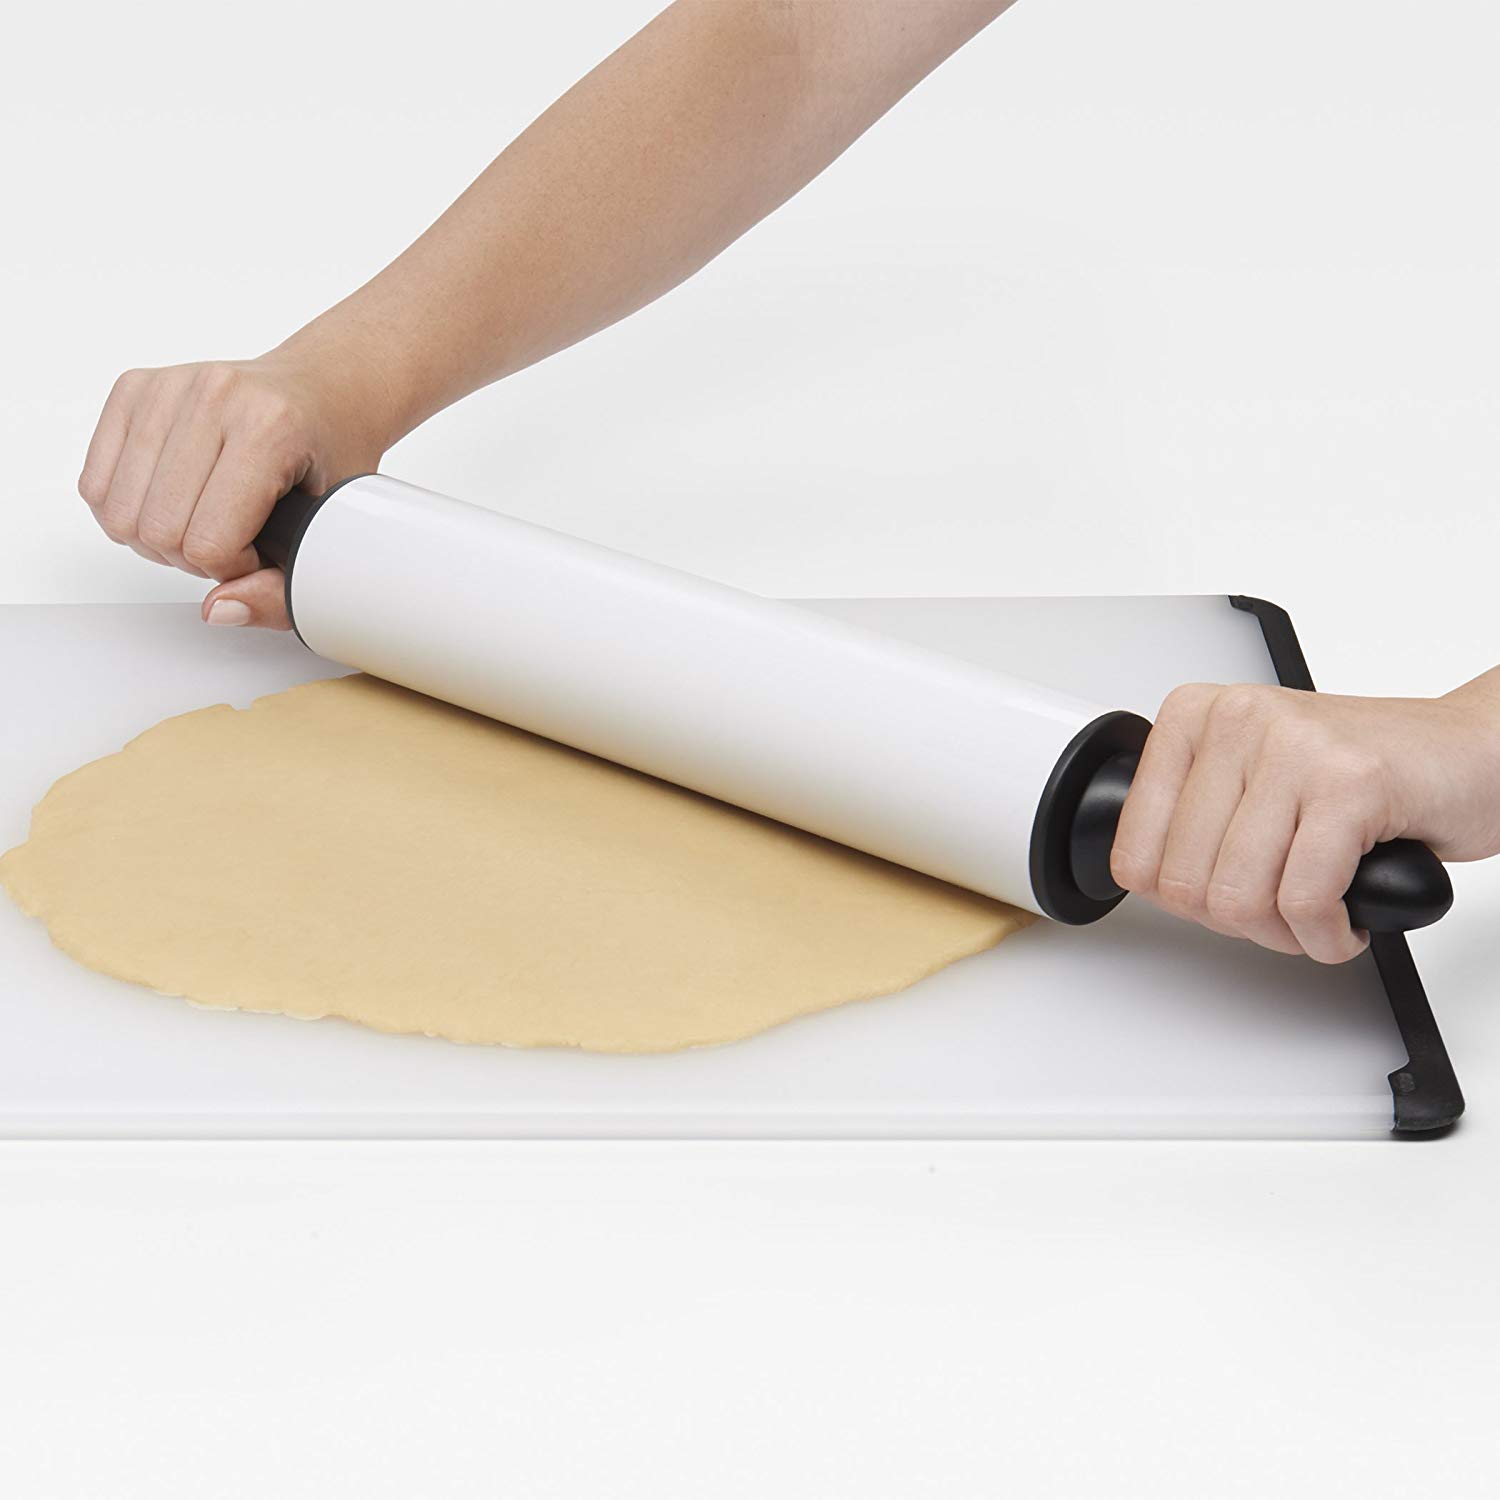 New Wooden Rolling Pin 13" Premium Quality 